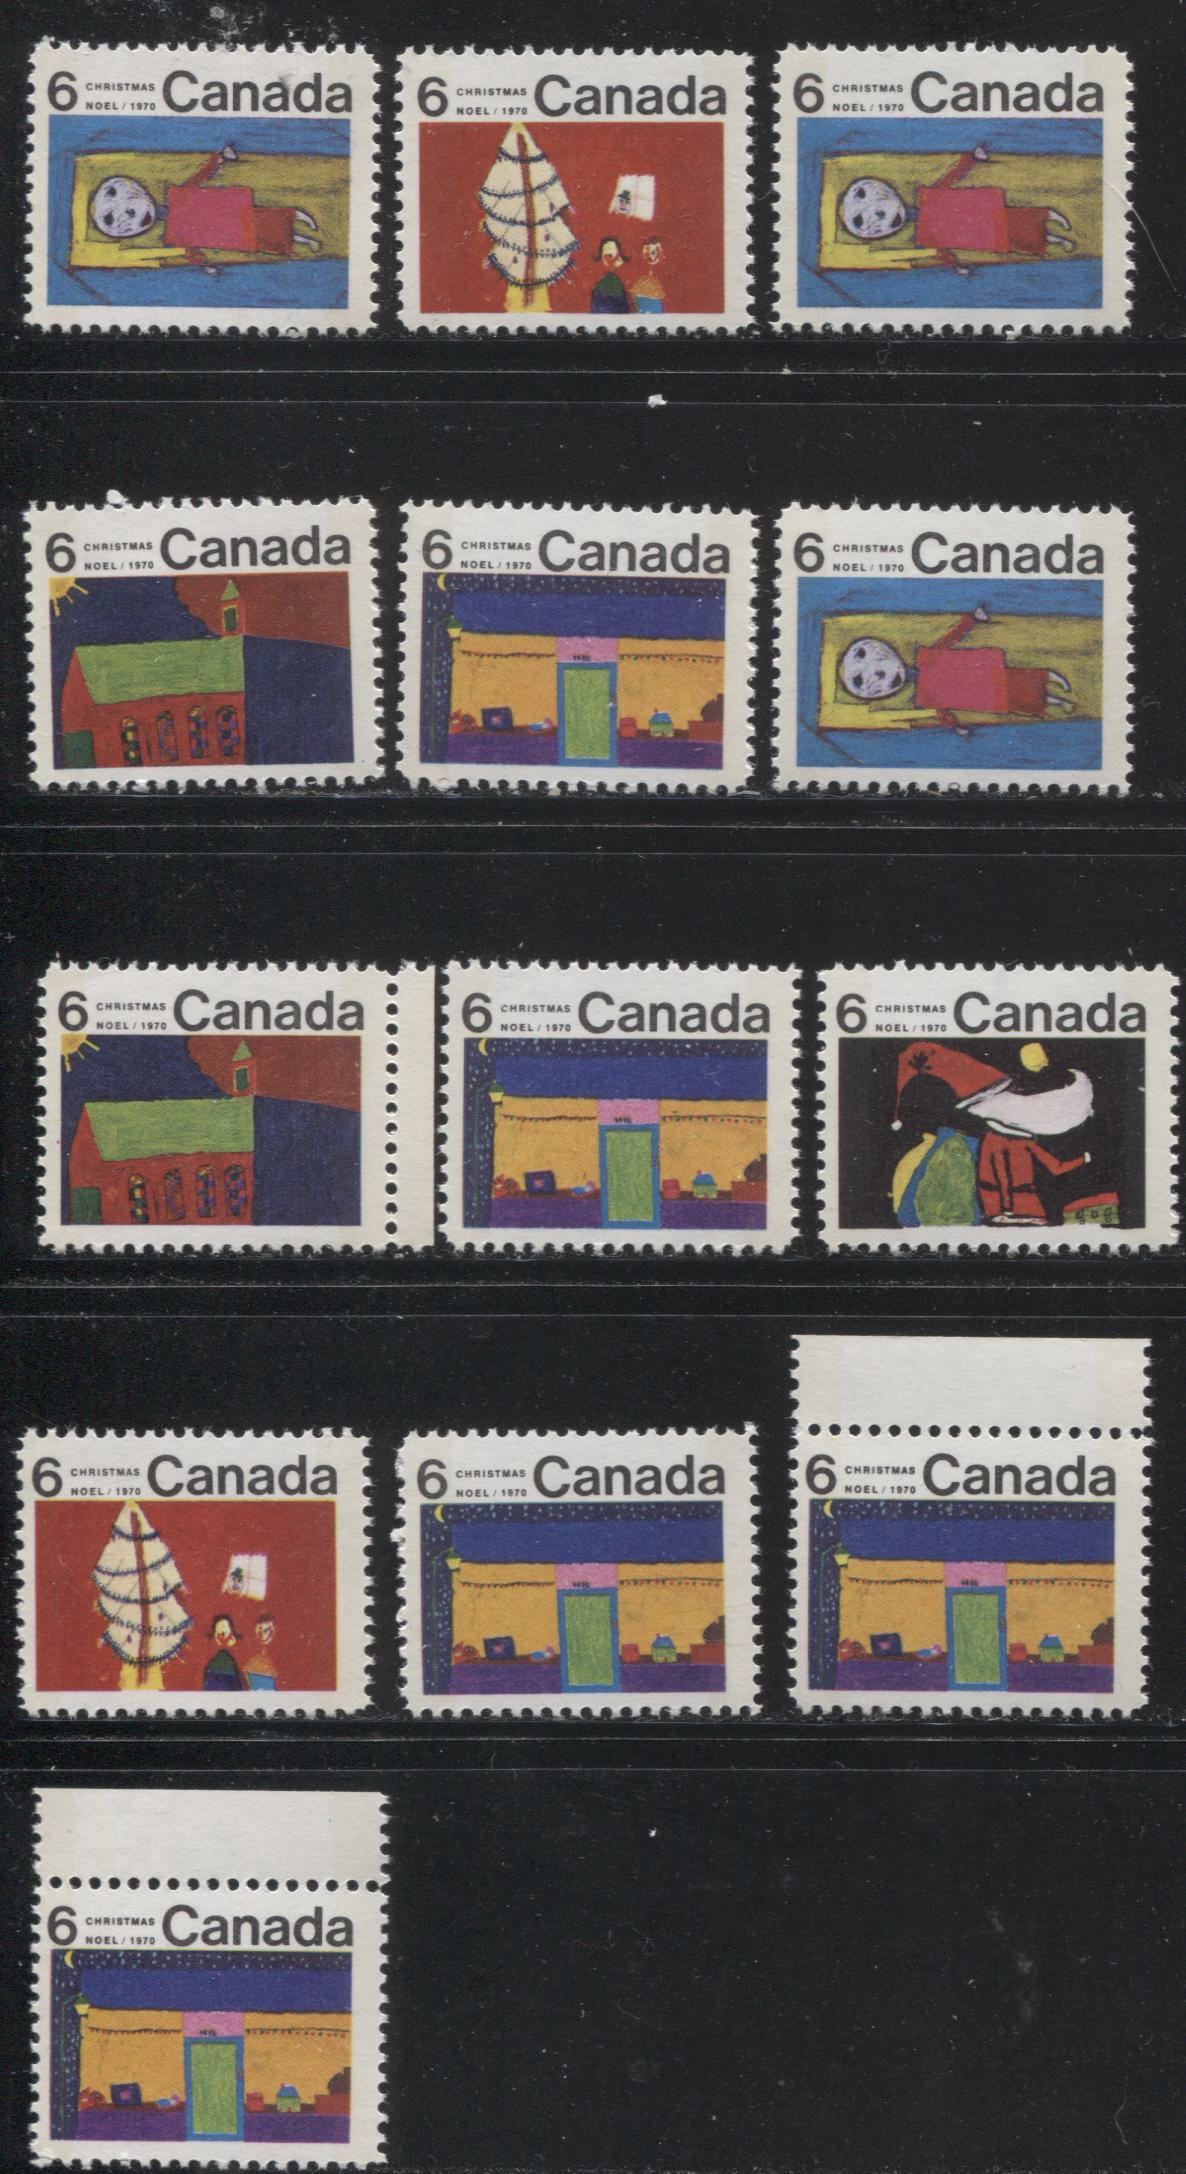 Lot 165 Canada #524p-528p 6c Multicoloured 1970 Christmas Issue, A Complete Set of 13 Winnipeg Tagged Constant Plate Varieties From Combination 4, Ribbed HB11 Paper, Perf. 11.9